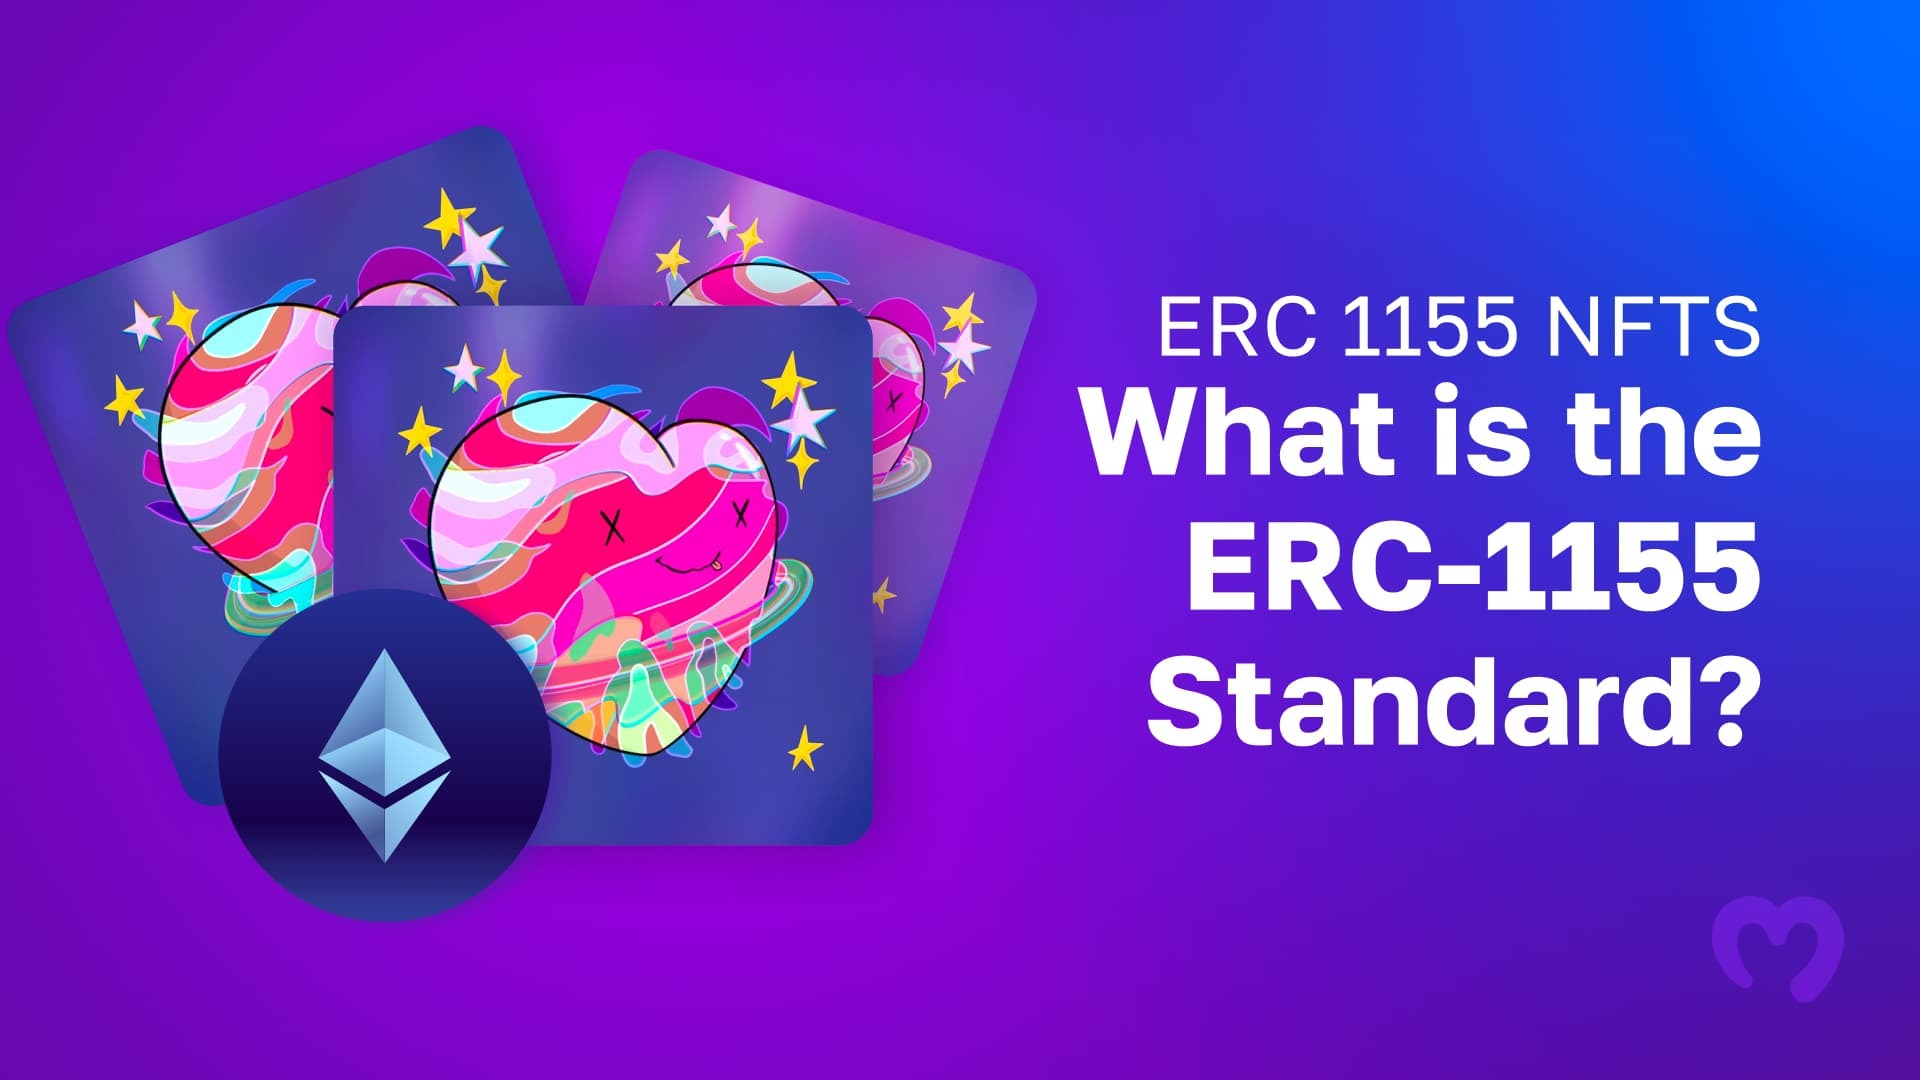 Exploring ERC 1155 NFTs - What is the ERC-1155 Standard?